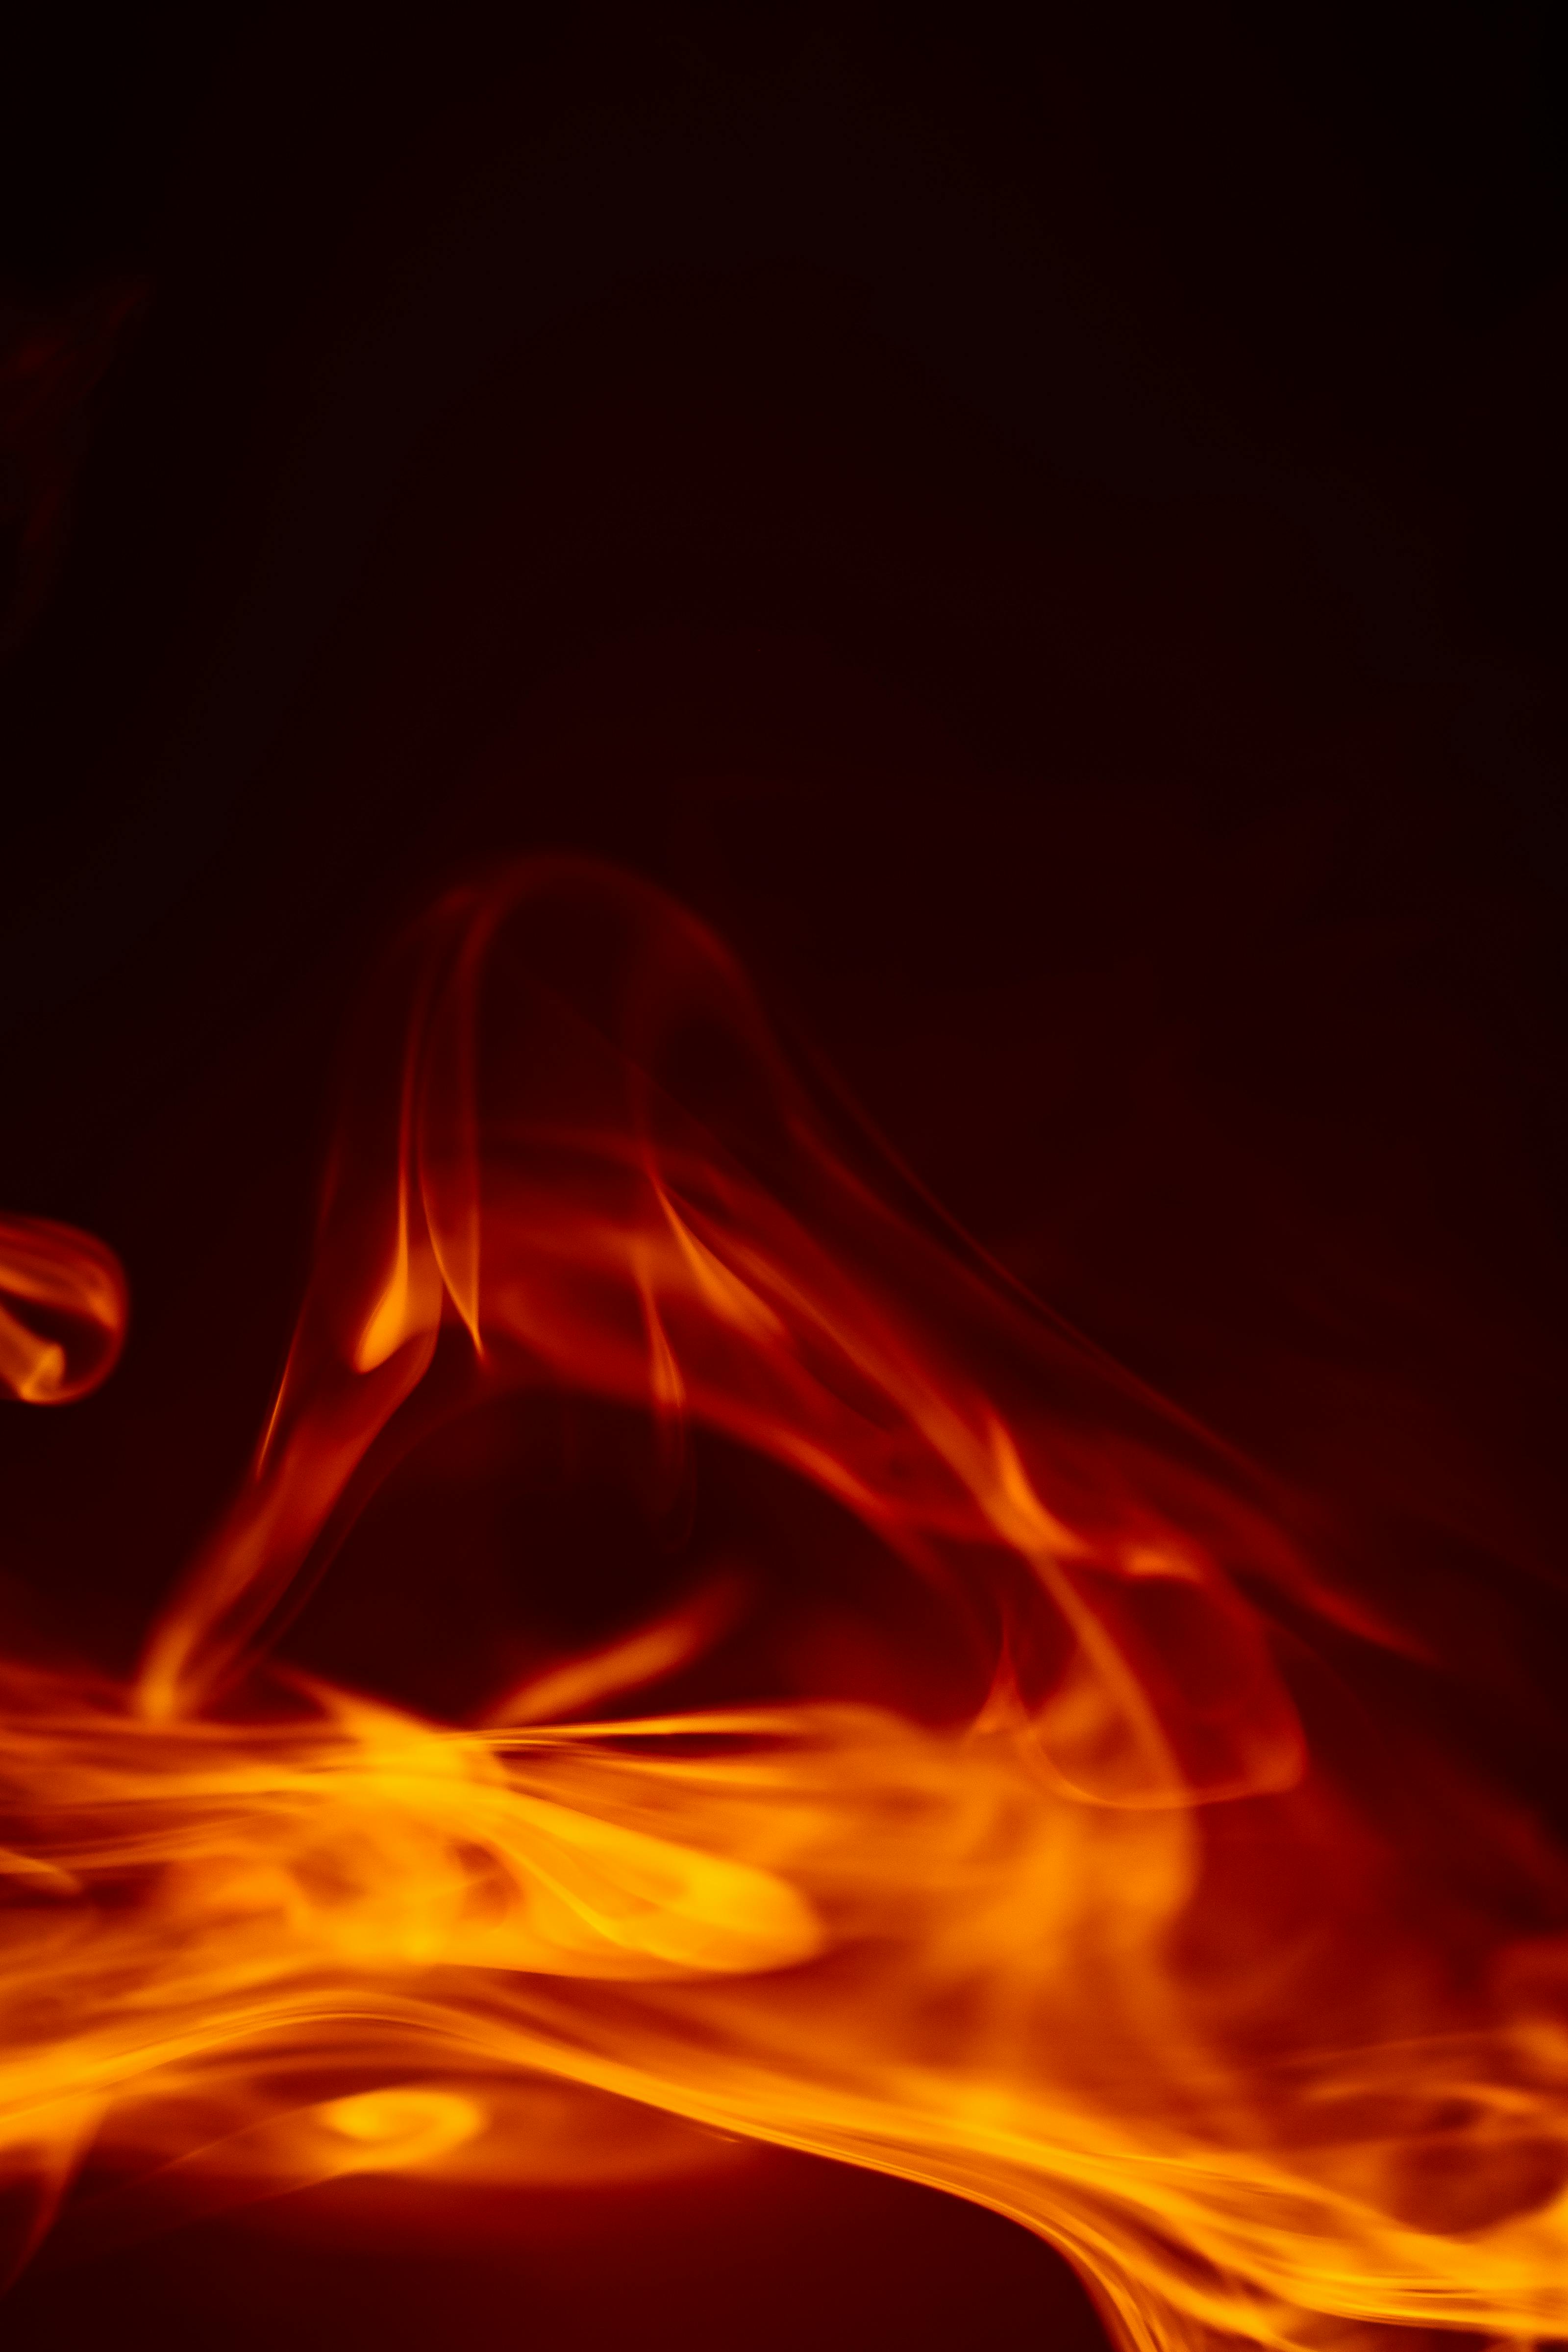 Hell Fire Pictures  Download Free Images on Unsplash